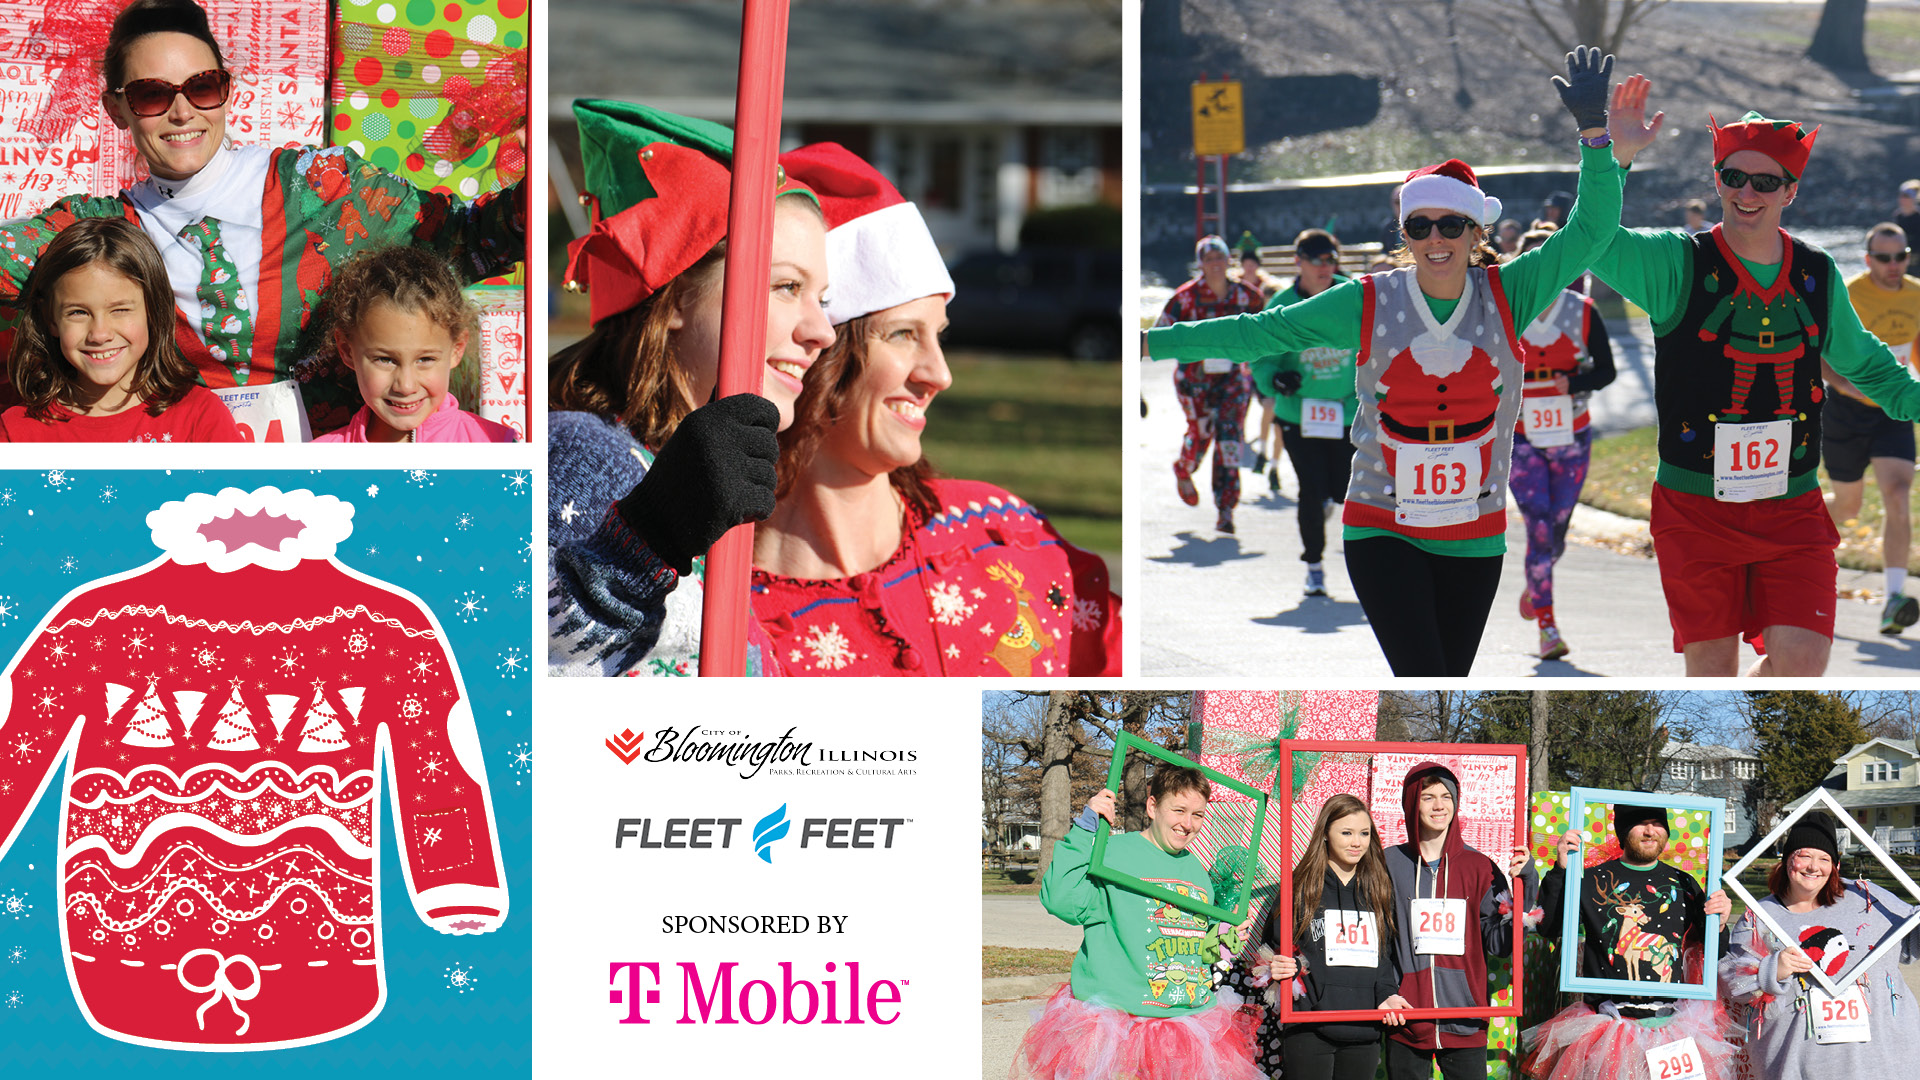 7th Annual Ugliest Sweater Run - Sponsored by T-Mobile